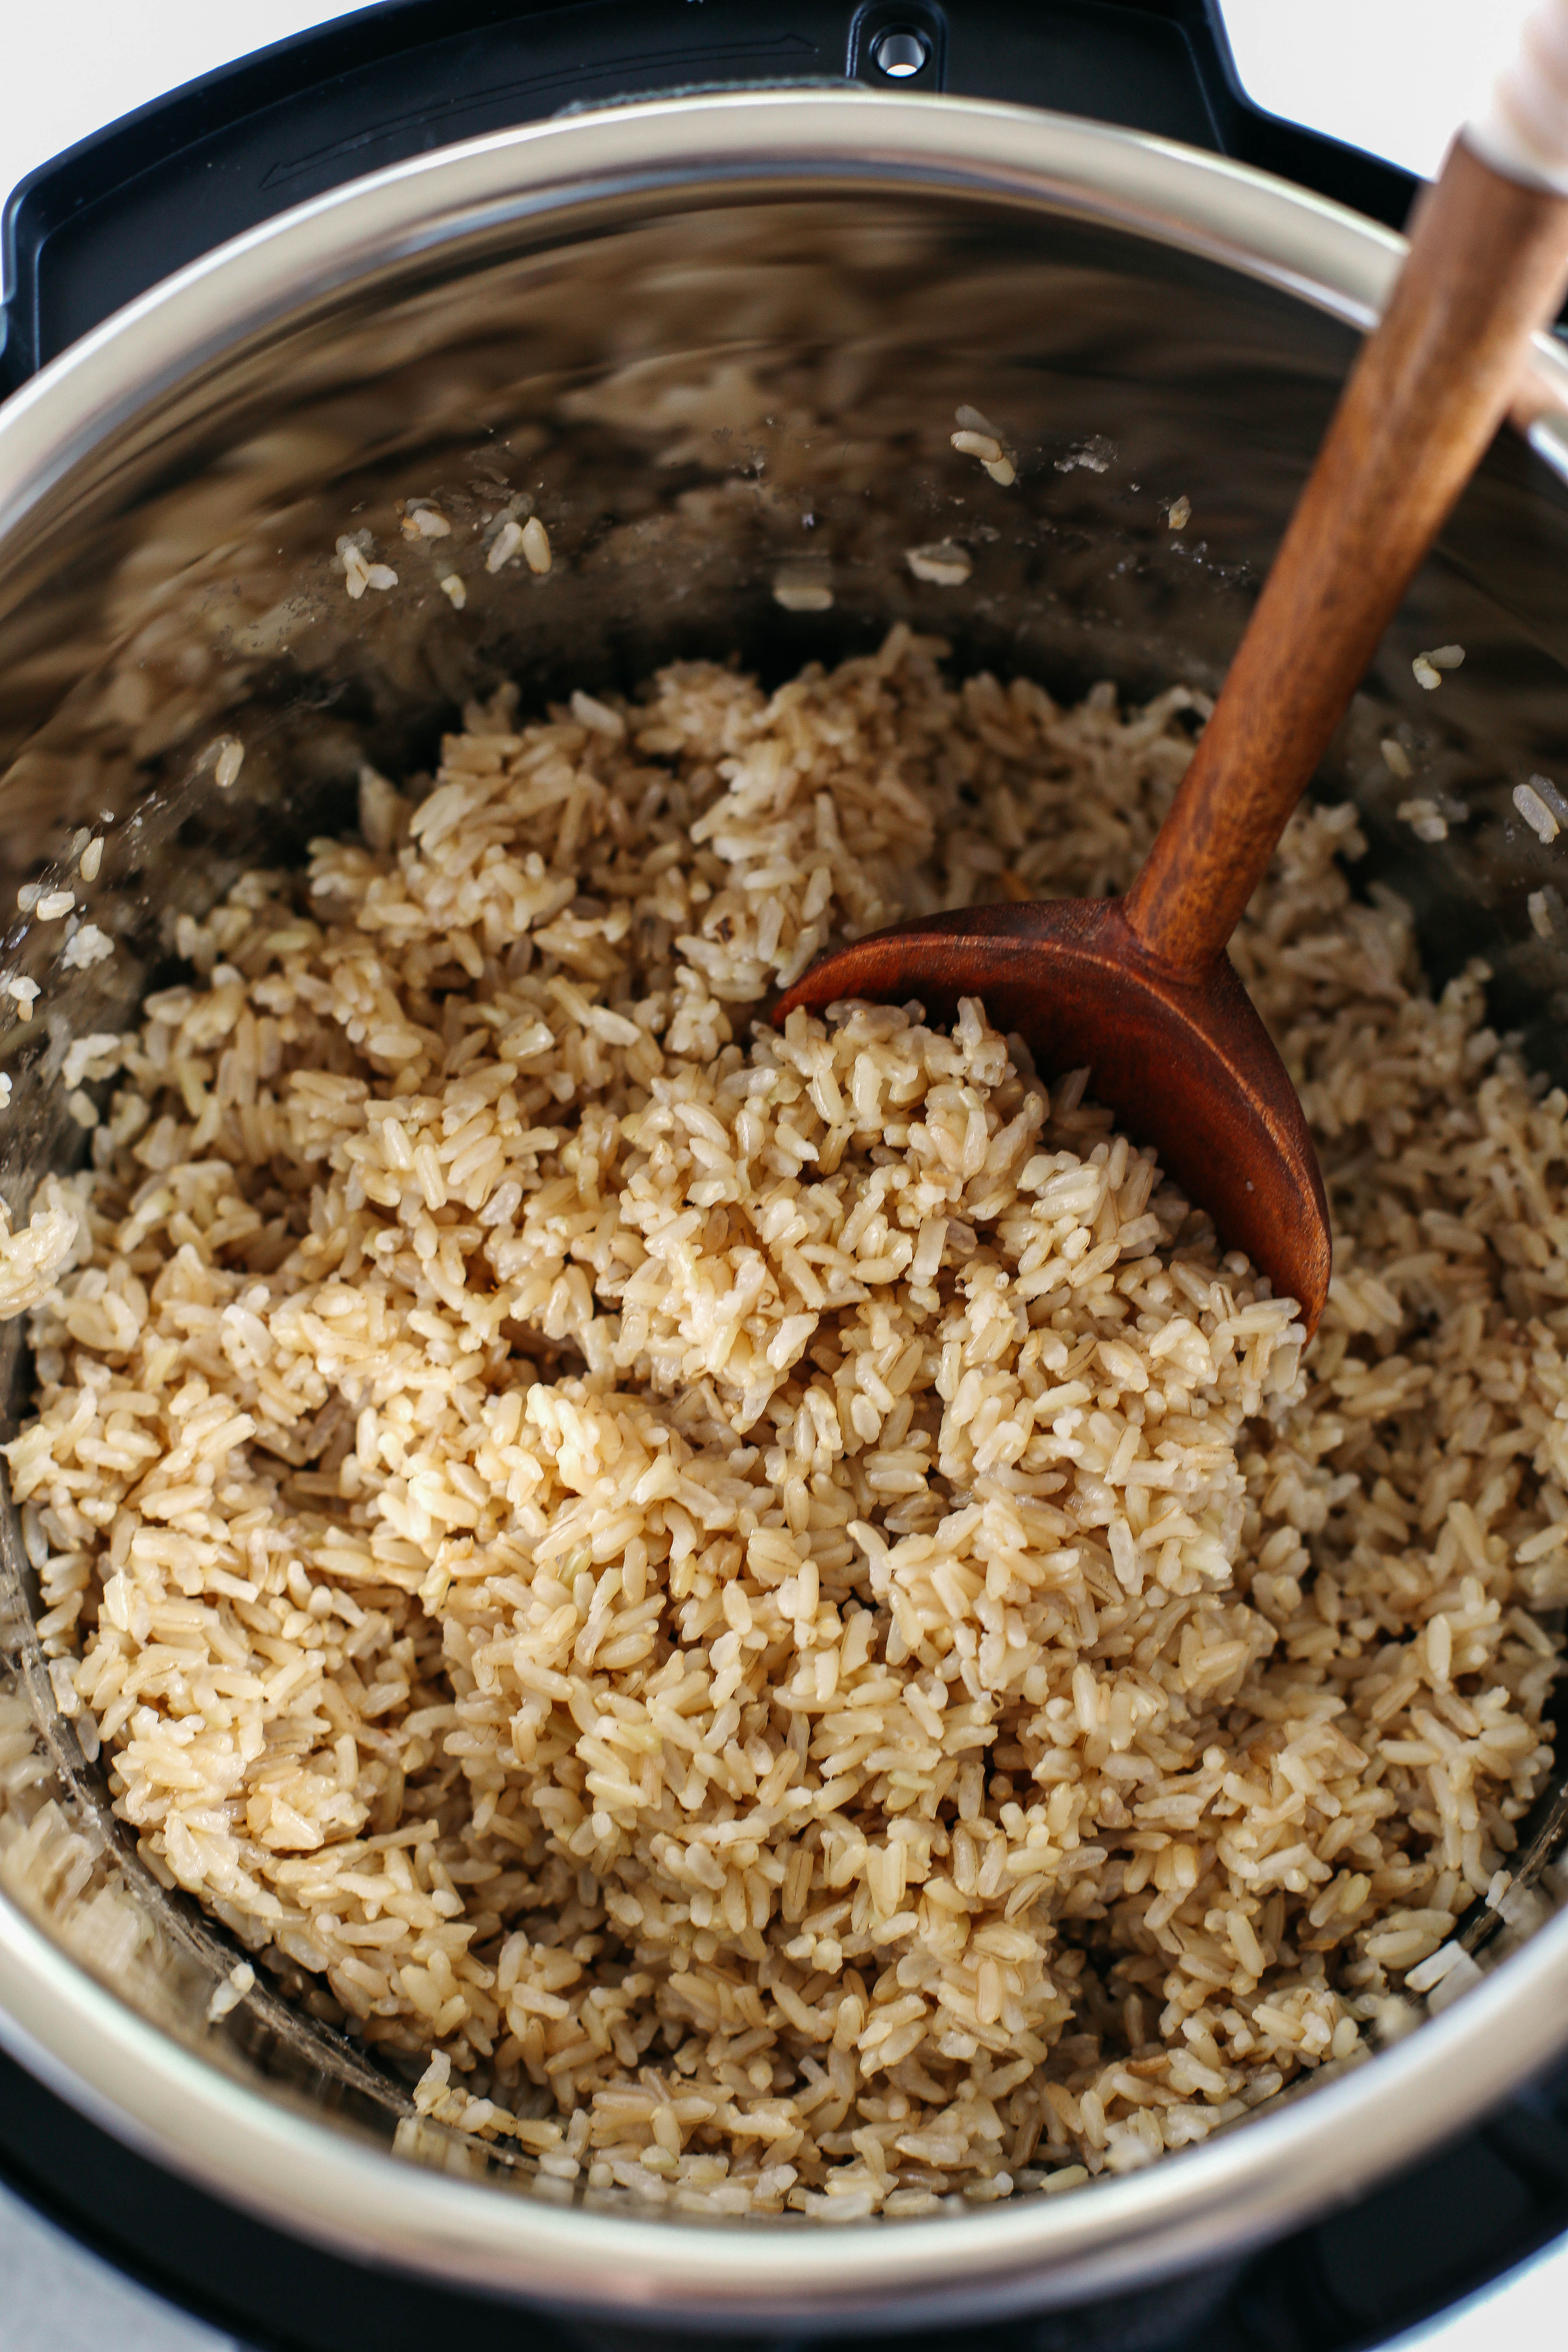 Perfectly cooked, fluffy brown rice EVERY TIME in about 30 minutes using the Instant Pot!  Hands down the easiest way to cook brown rice and perfect for meal prep!